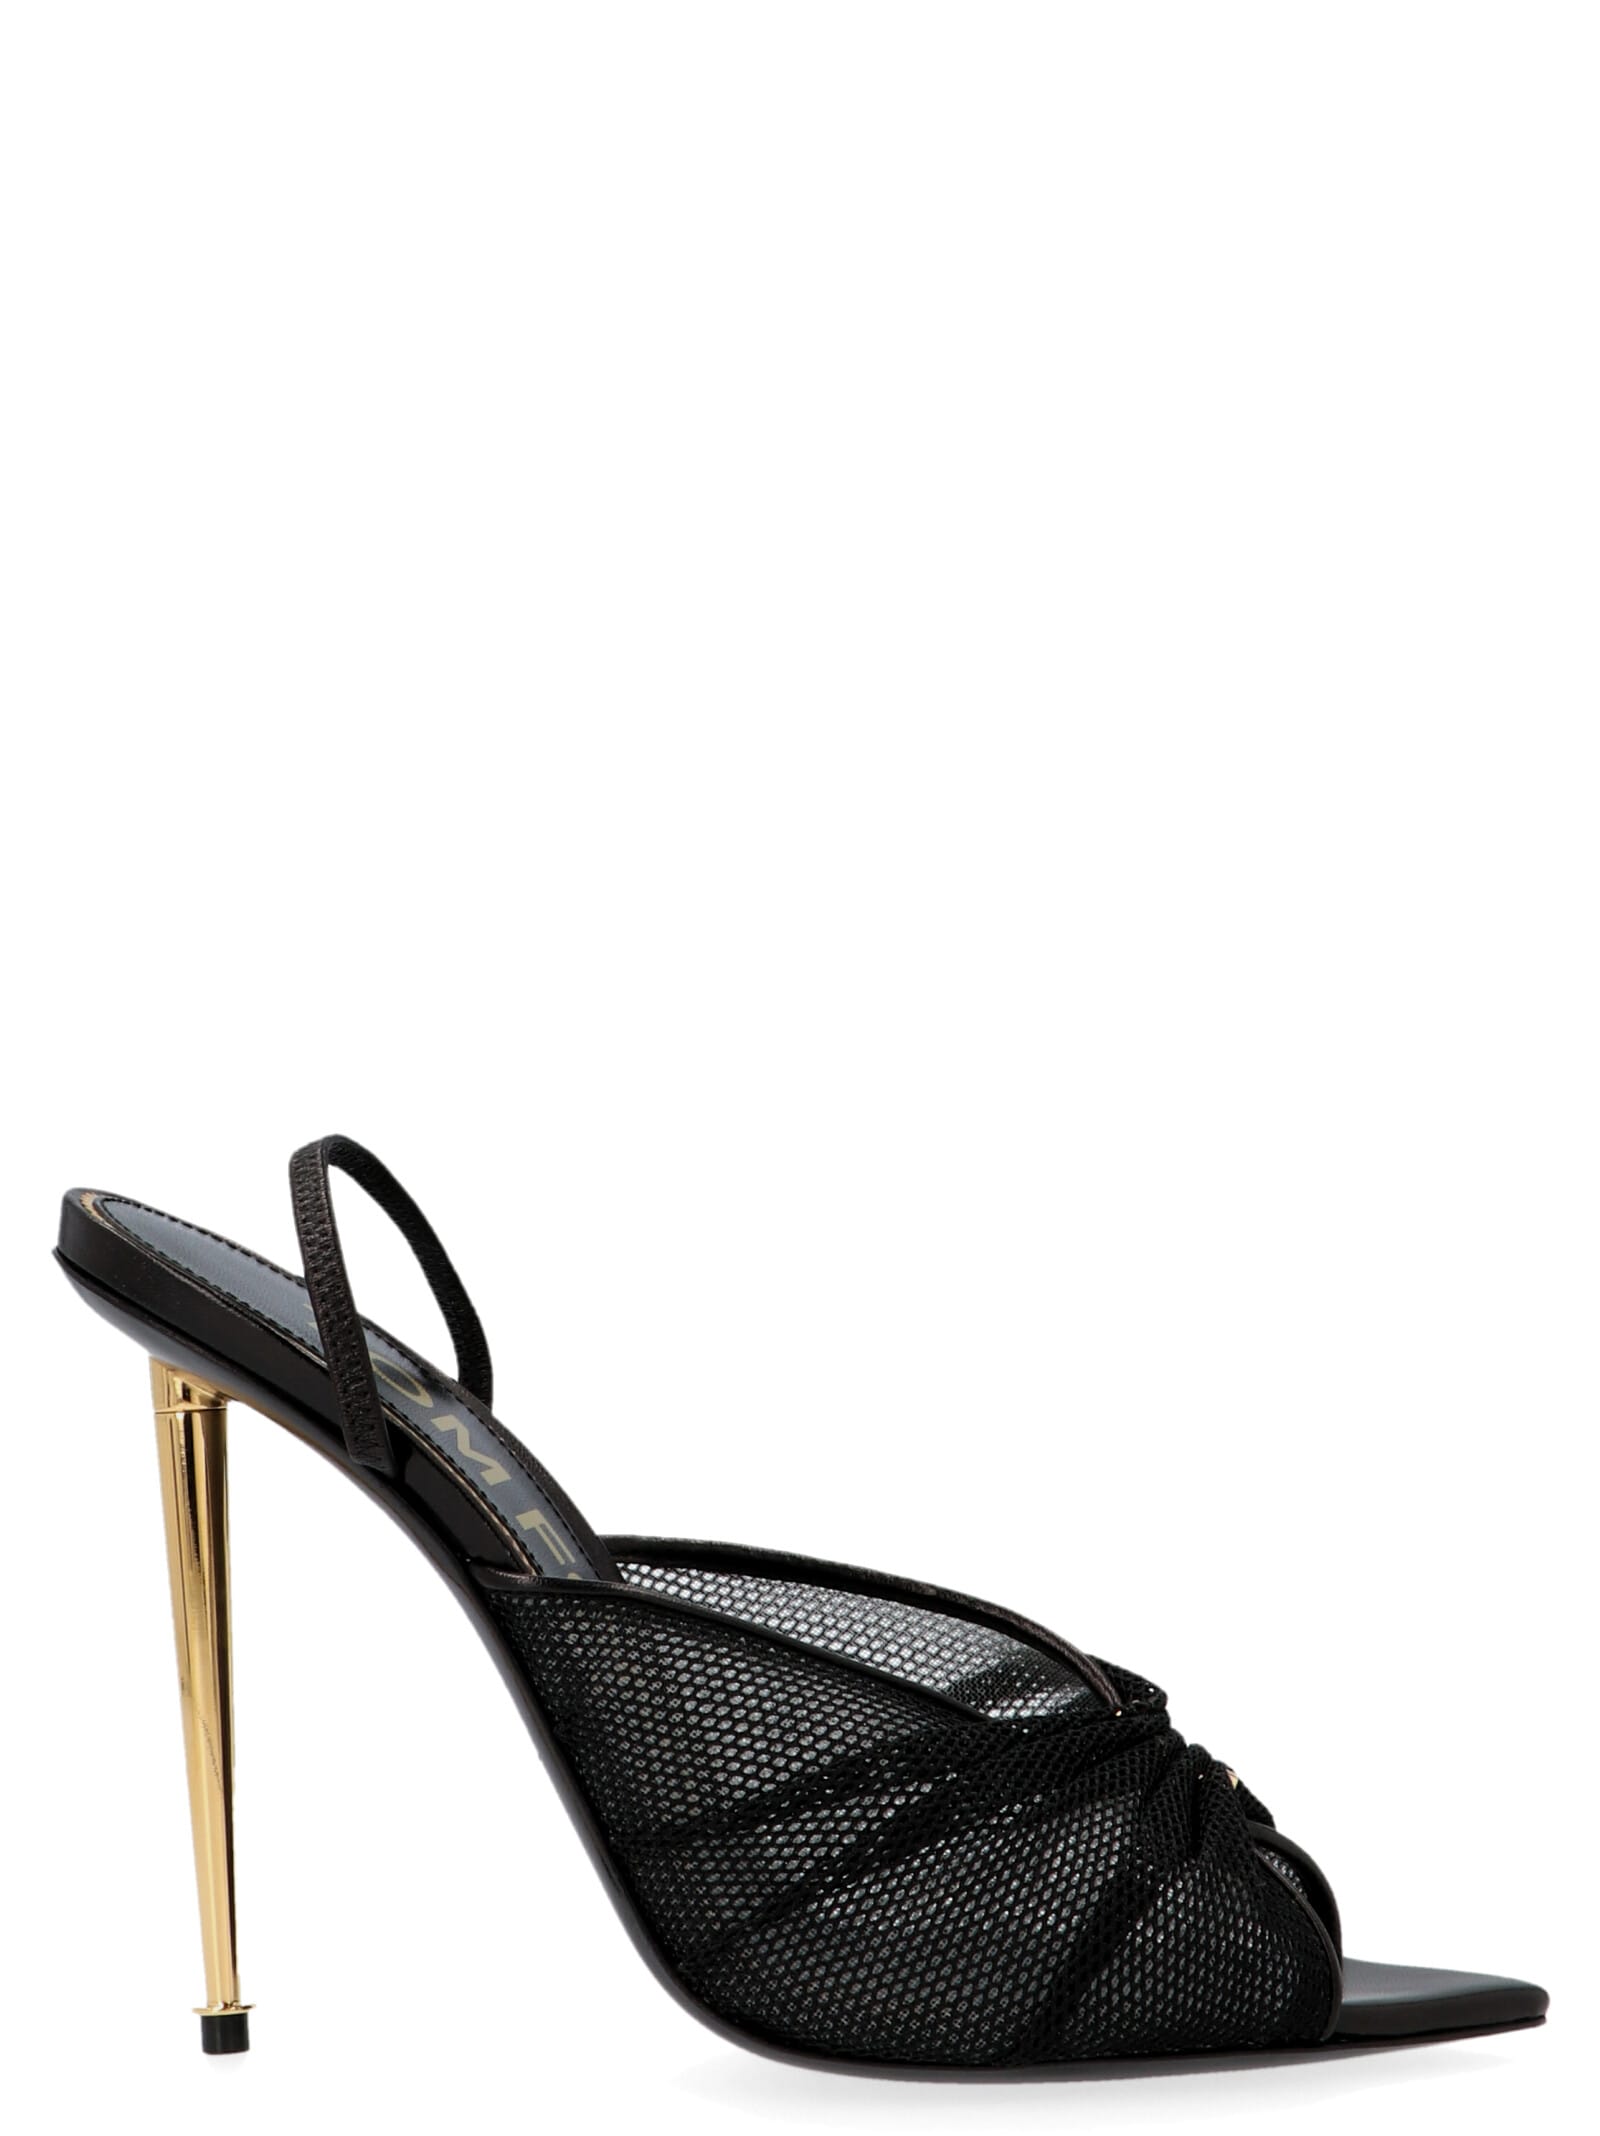 TOM FORD HIGH HEEL SHOES,11207935